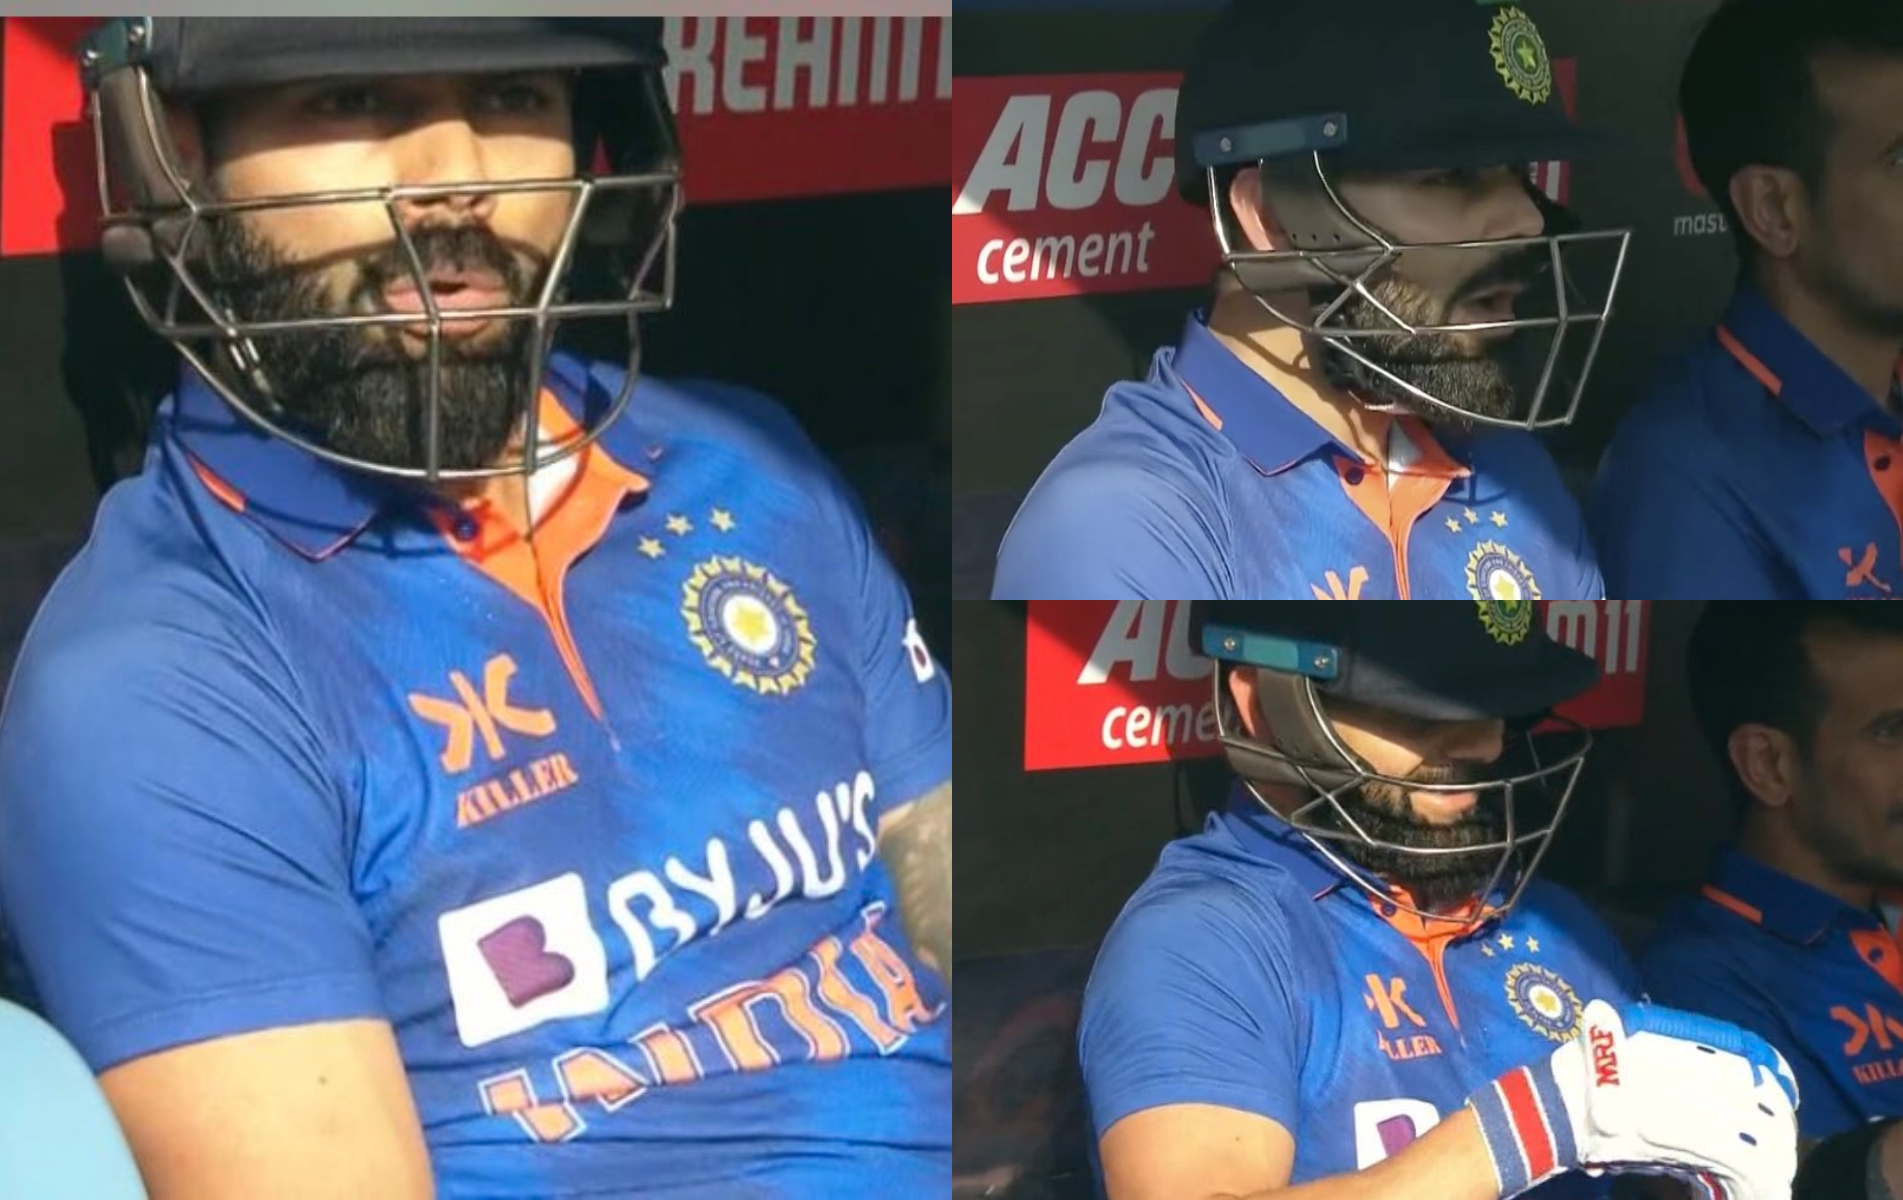 Virat Kohli had some priceless reactions to Shubman Gill surviving a close LBW call | Twitter